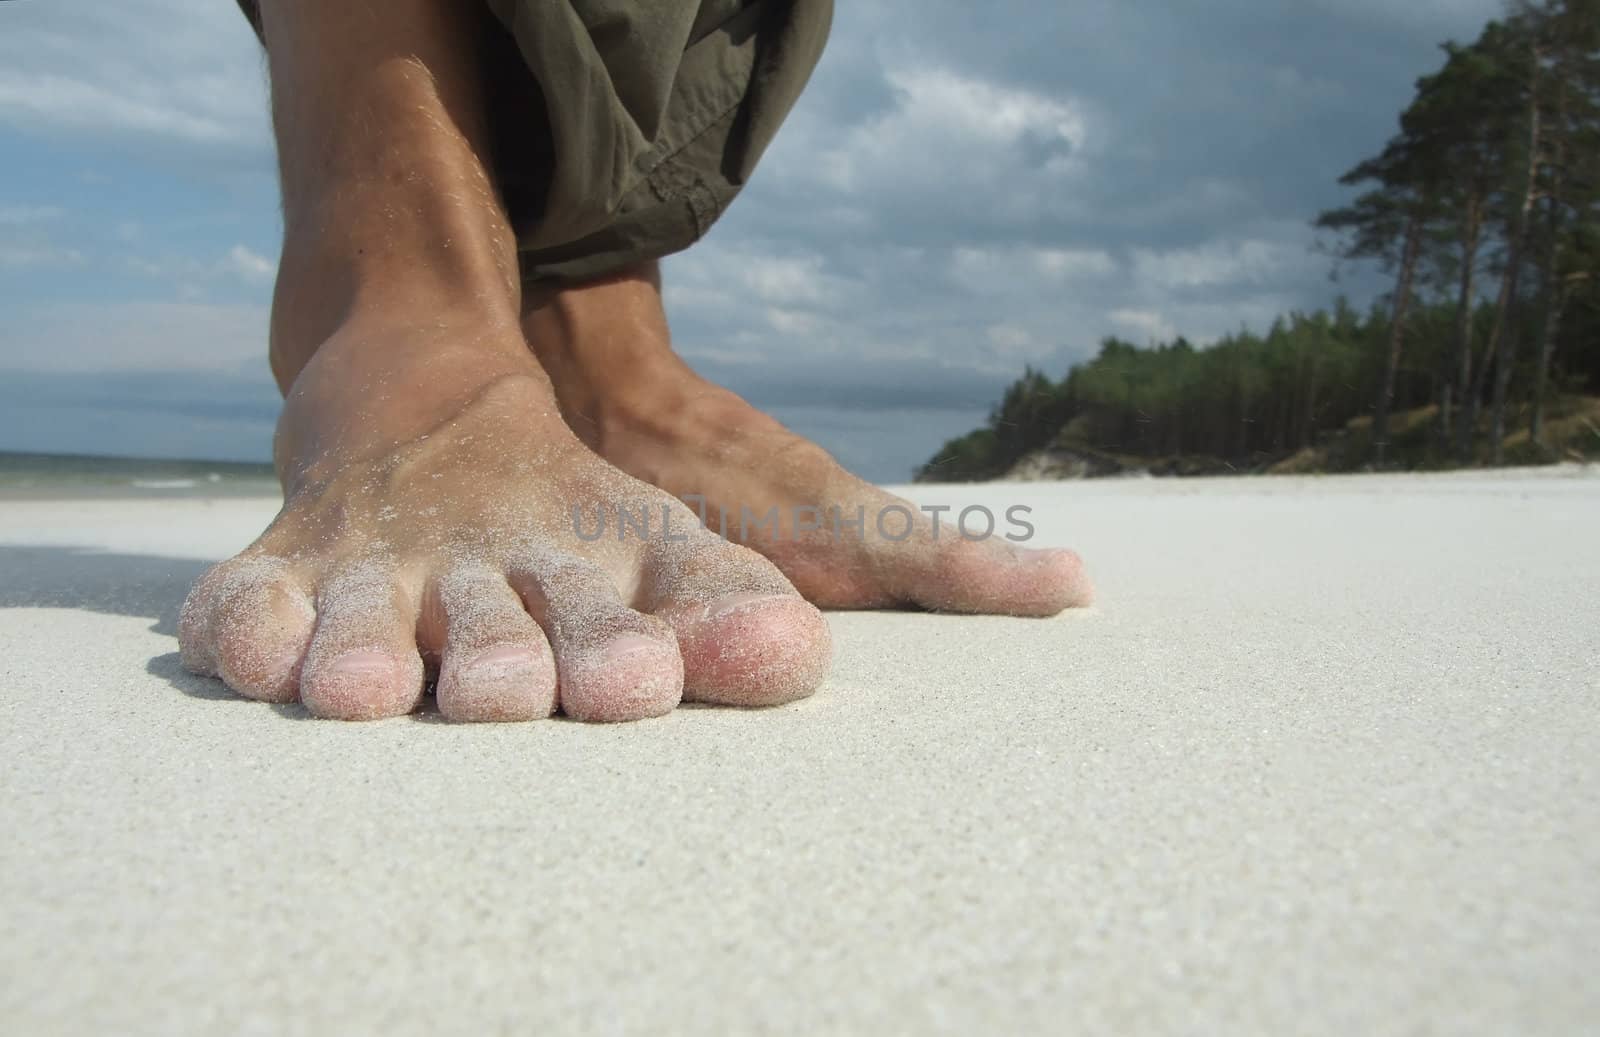 My two feet on the beach by whiteowl